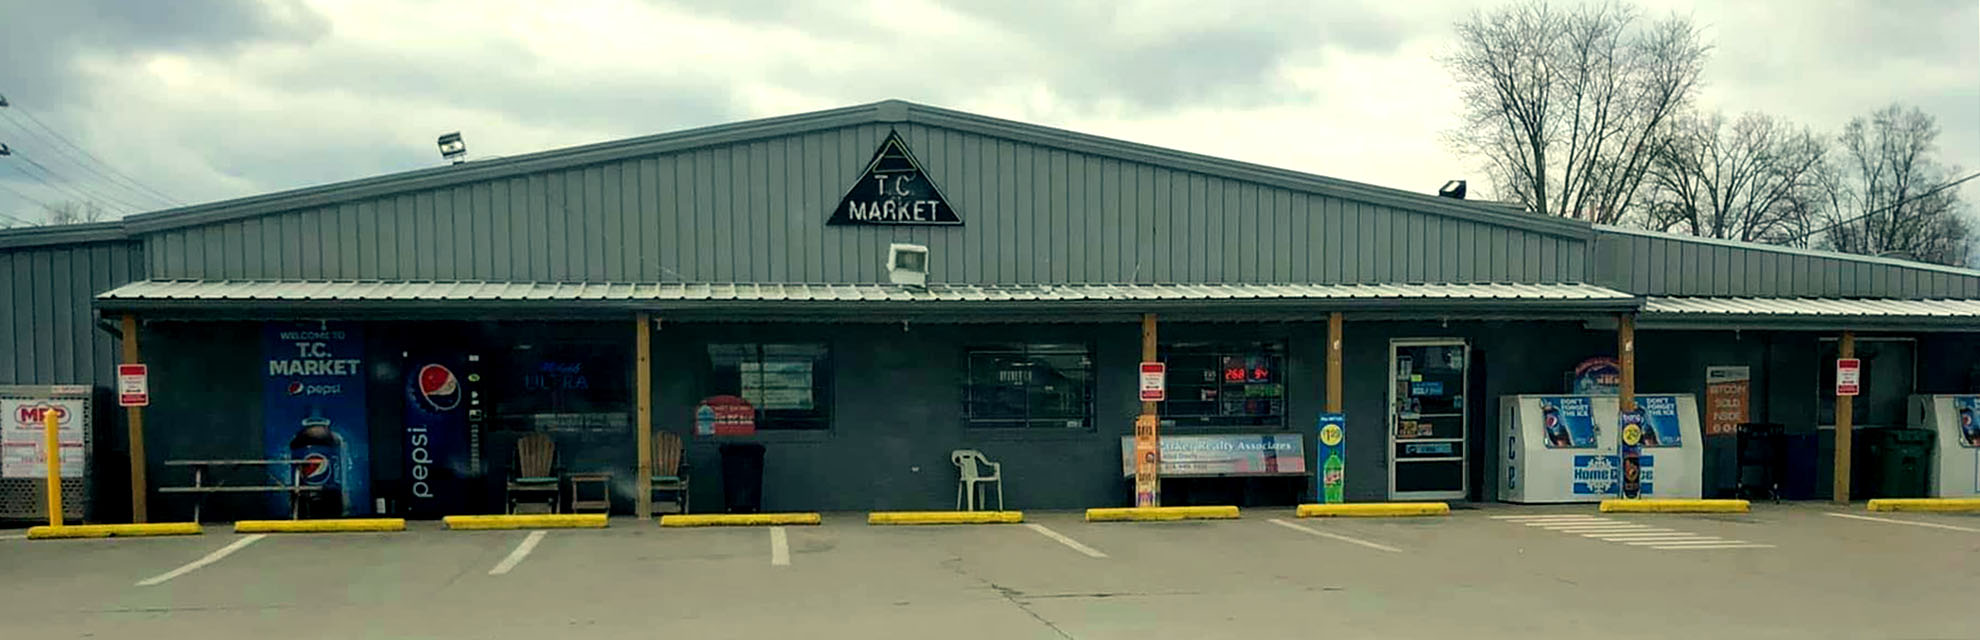 Exterior of TC Market in Thornville, Perry County, Ohio.